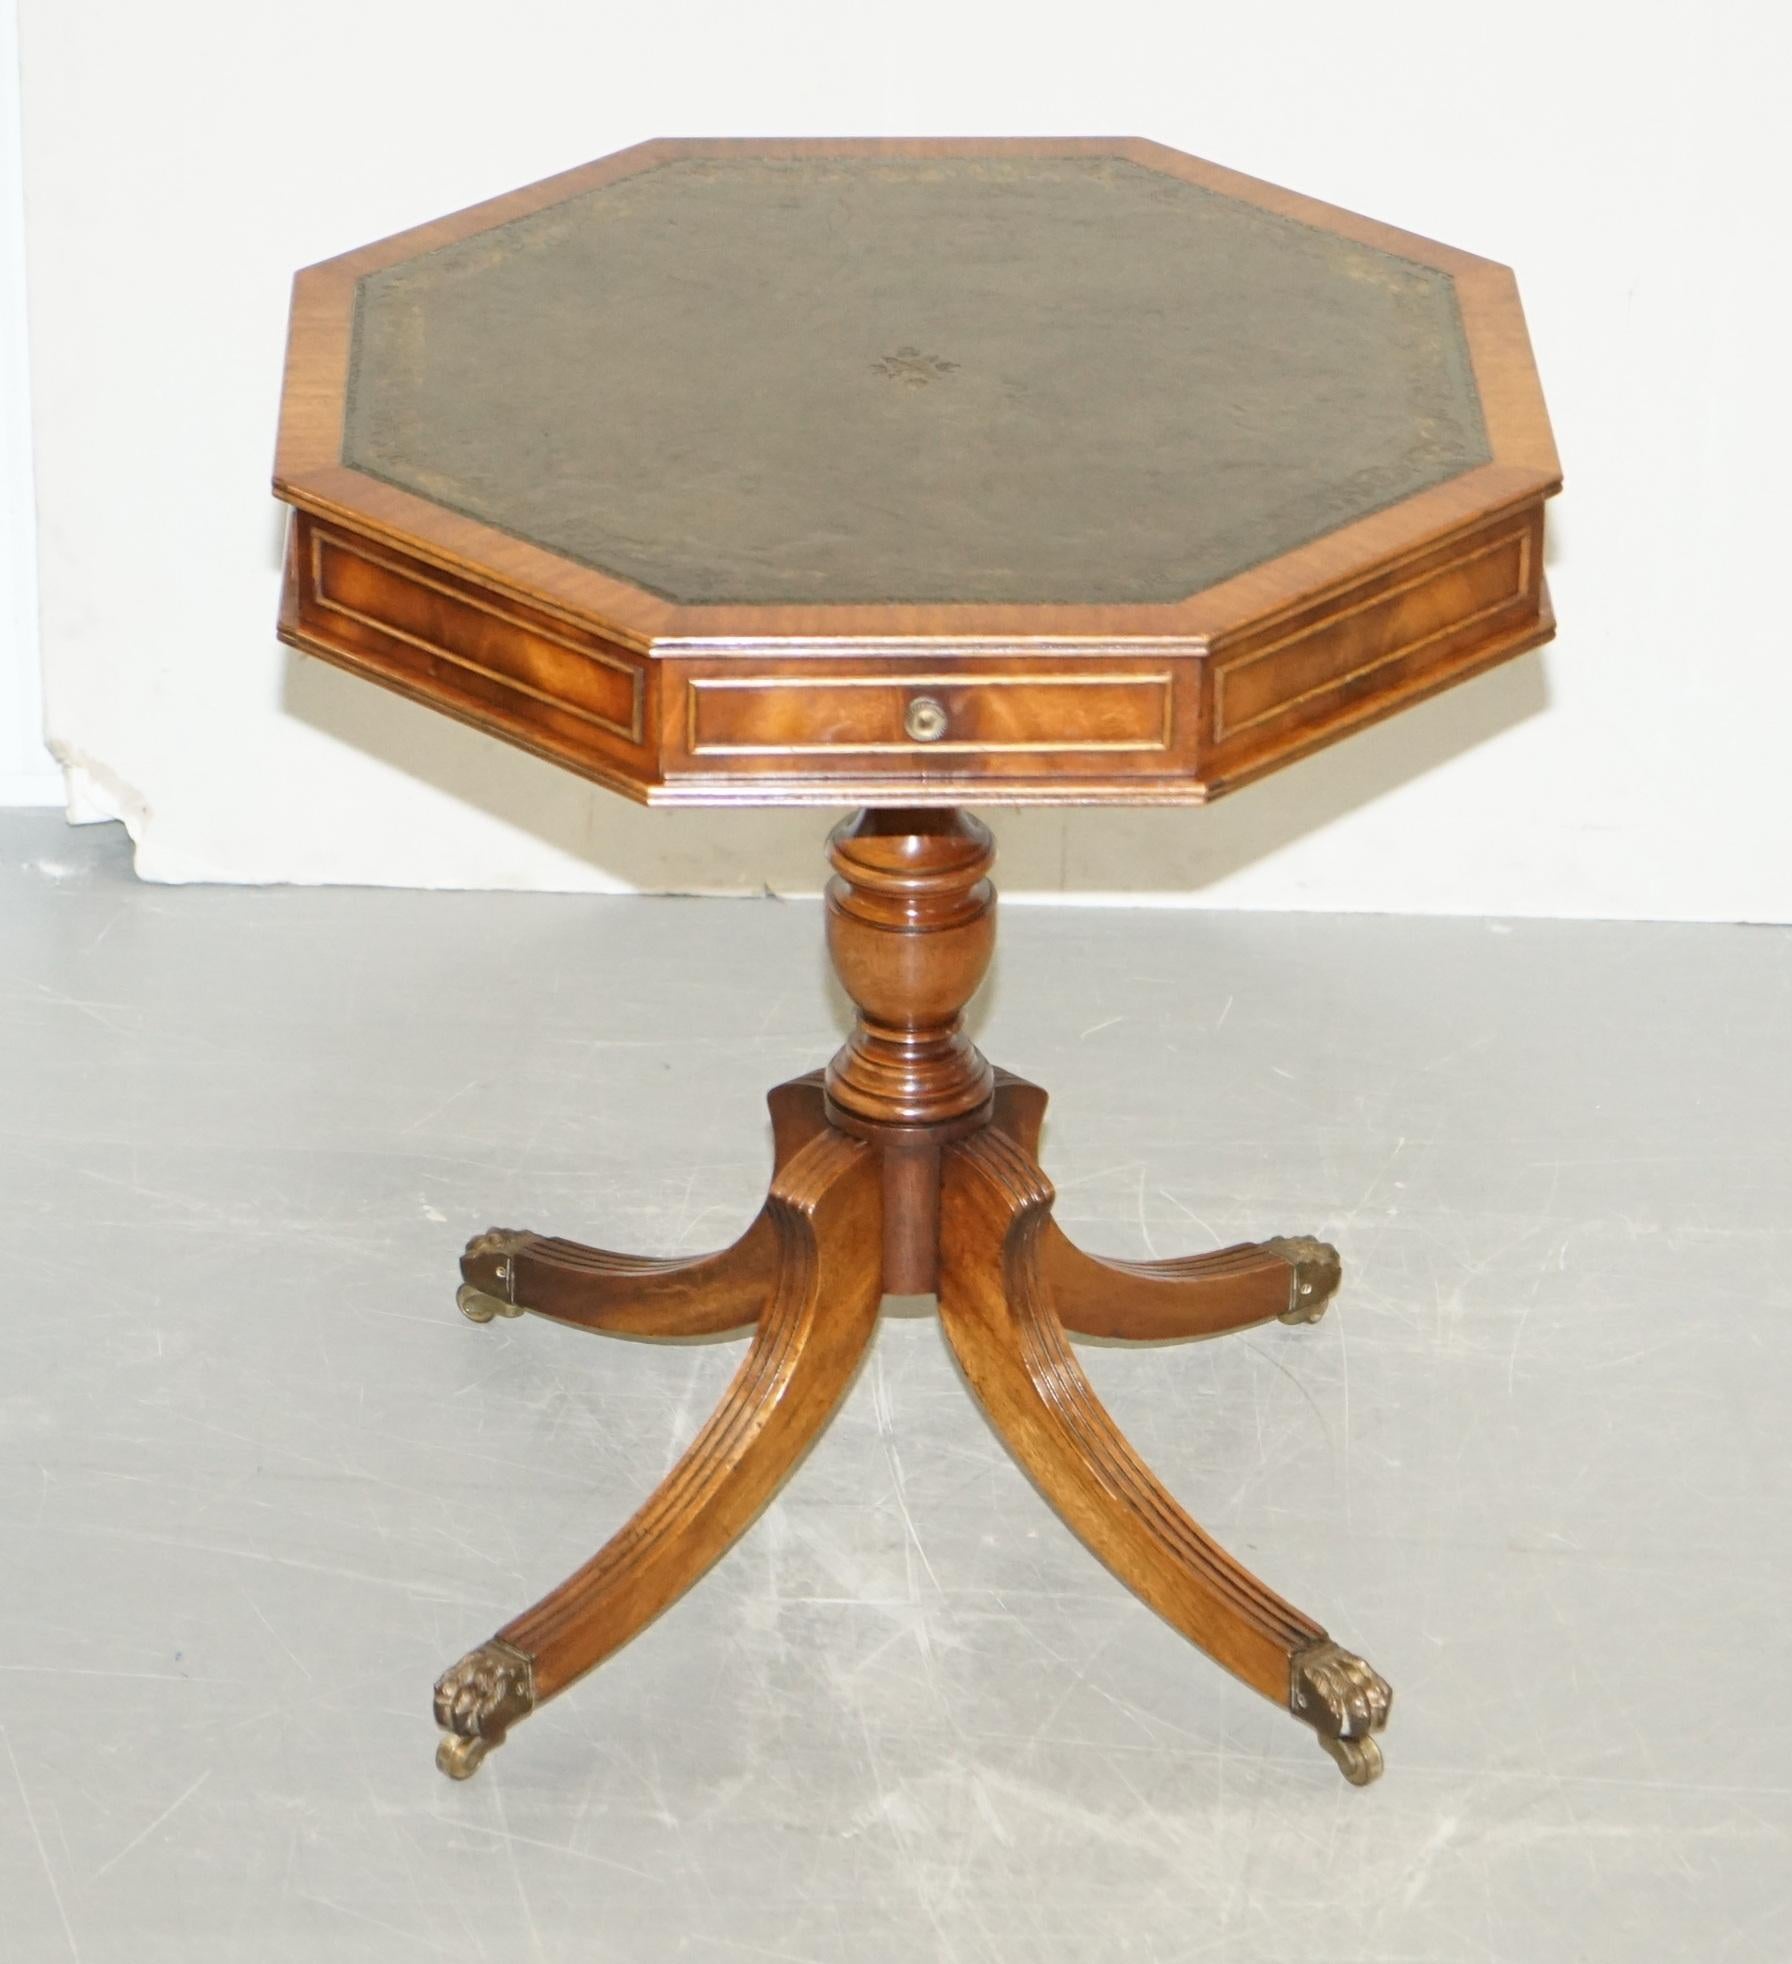 We are delighted to offer for sale this lovely Regency style mahogany drum table with leather top 

A good looking piece, the leather top has nicely aged, it has gold leaf embossing, the handles are all original and the top is on a revolving base